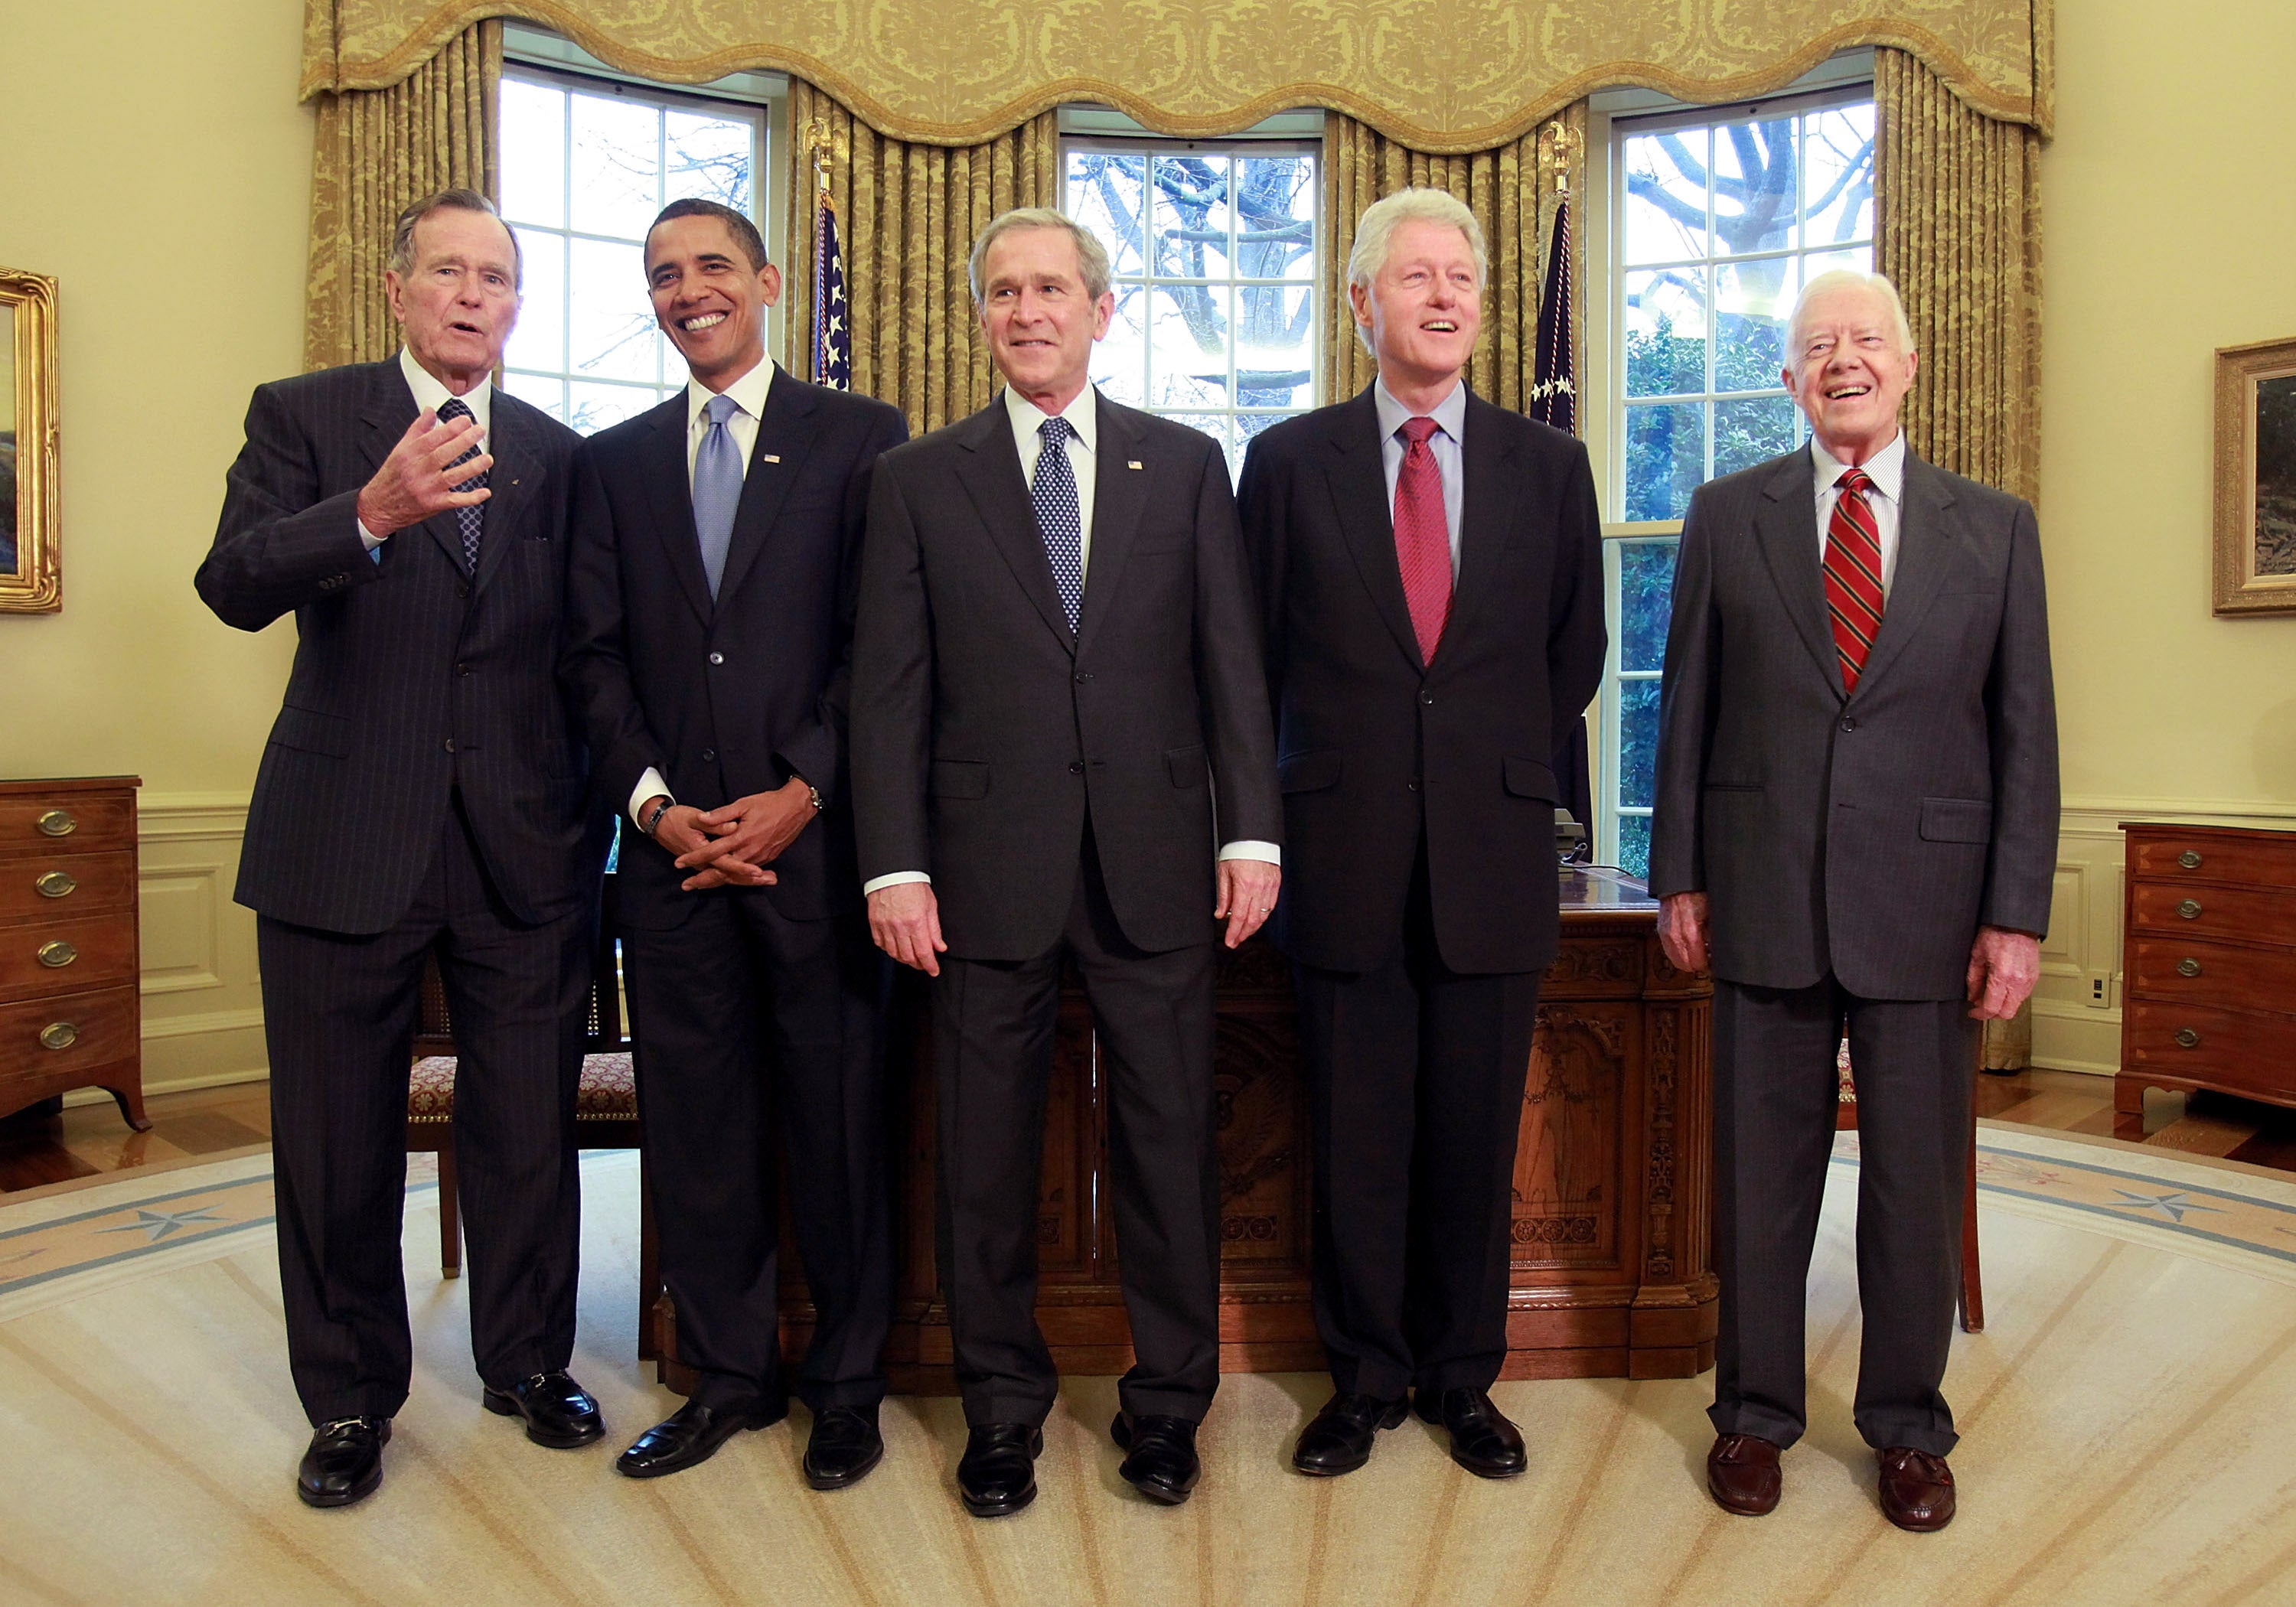 U.S. President George W. Bush meets with President-elect Barack Obama, former President Bill Clinton, former President Jimmy Carter and former President George H.W. Bush in the Oval Office January 7, 2009 in Washington, DC